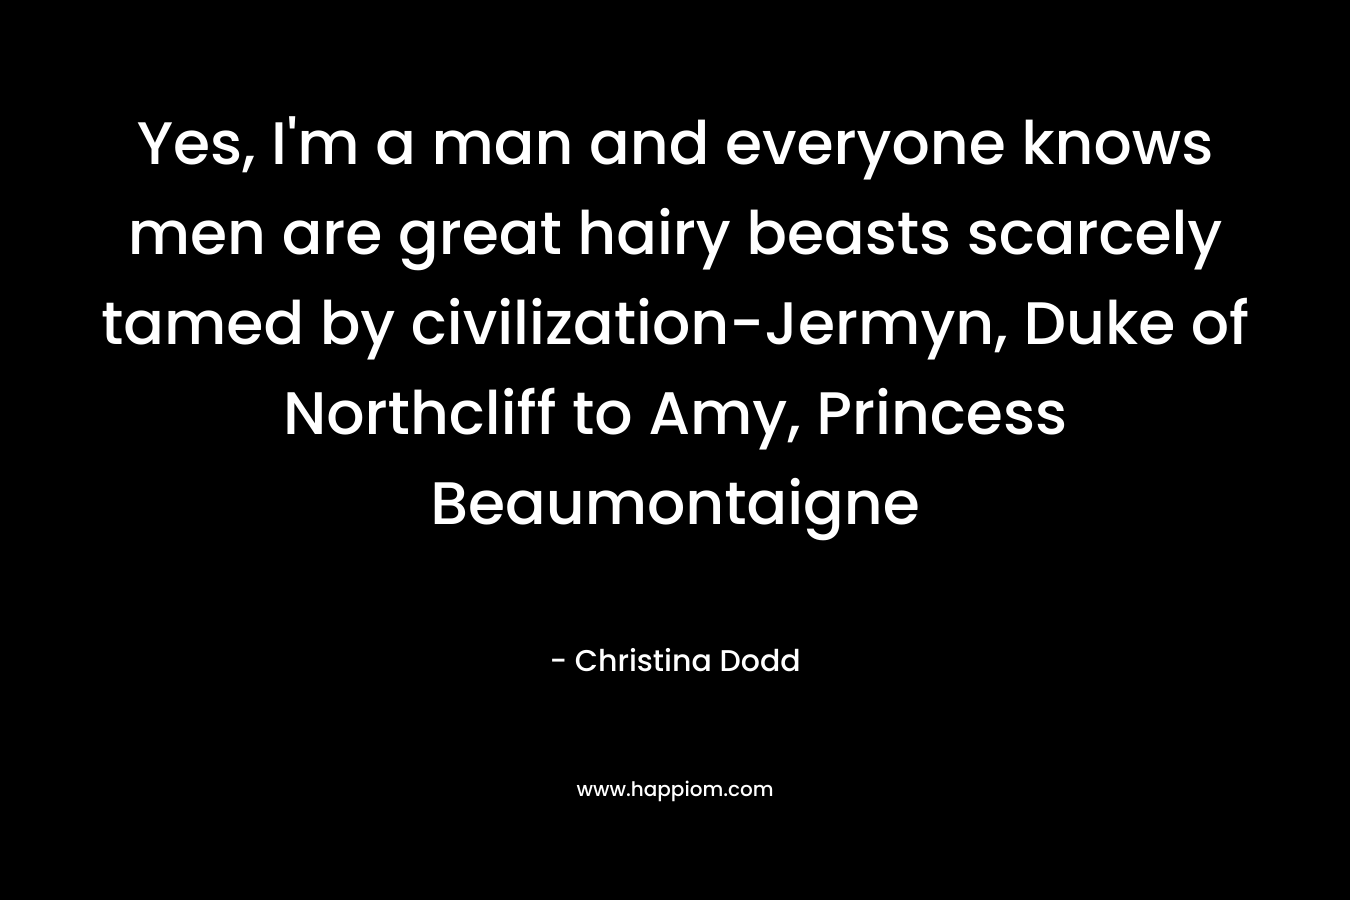 Yes, I’m a man and everyone knows men are great hairy beasts scarcely tamed by civilization-Jermyn, Duke of Northcliff to Amy, Princess Beaumontaigne – Christina Dodd